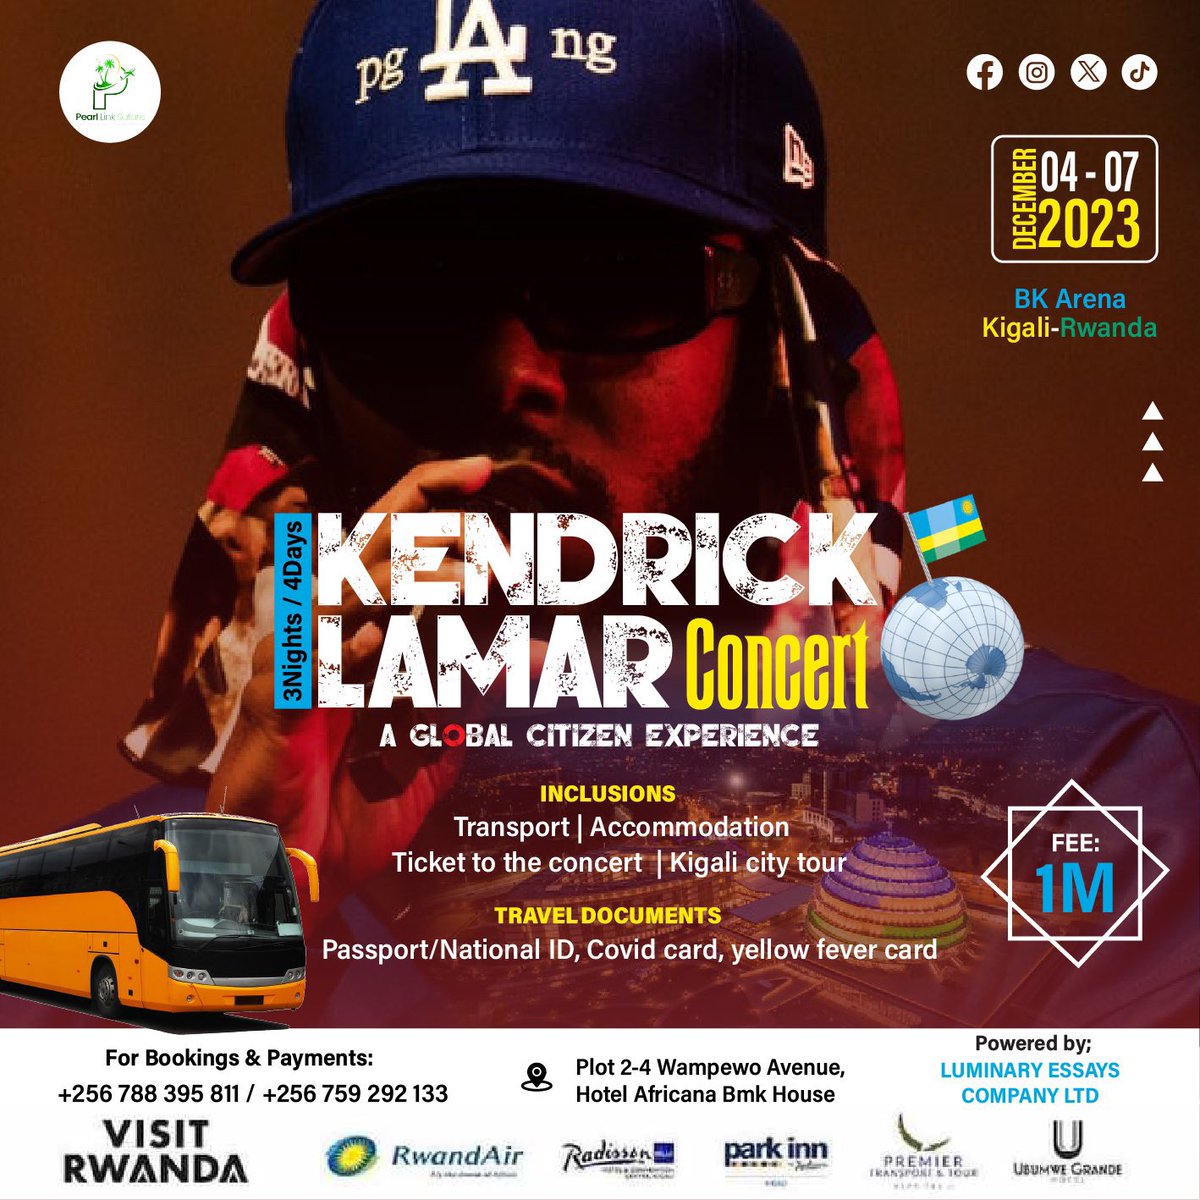 🎶 An unforgettable musical experience awaits! 

🎤 Enjoy Global Citizen’s #MOVEAFRIKA: RWANDA in Kigali with Kendrick Lamar and a lineup of incredible artists, & enhance your experience with special travel packages by @PLink_Safaris 

🗓️ 6 Dec 2023
Book your tickets now